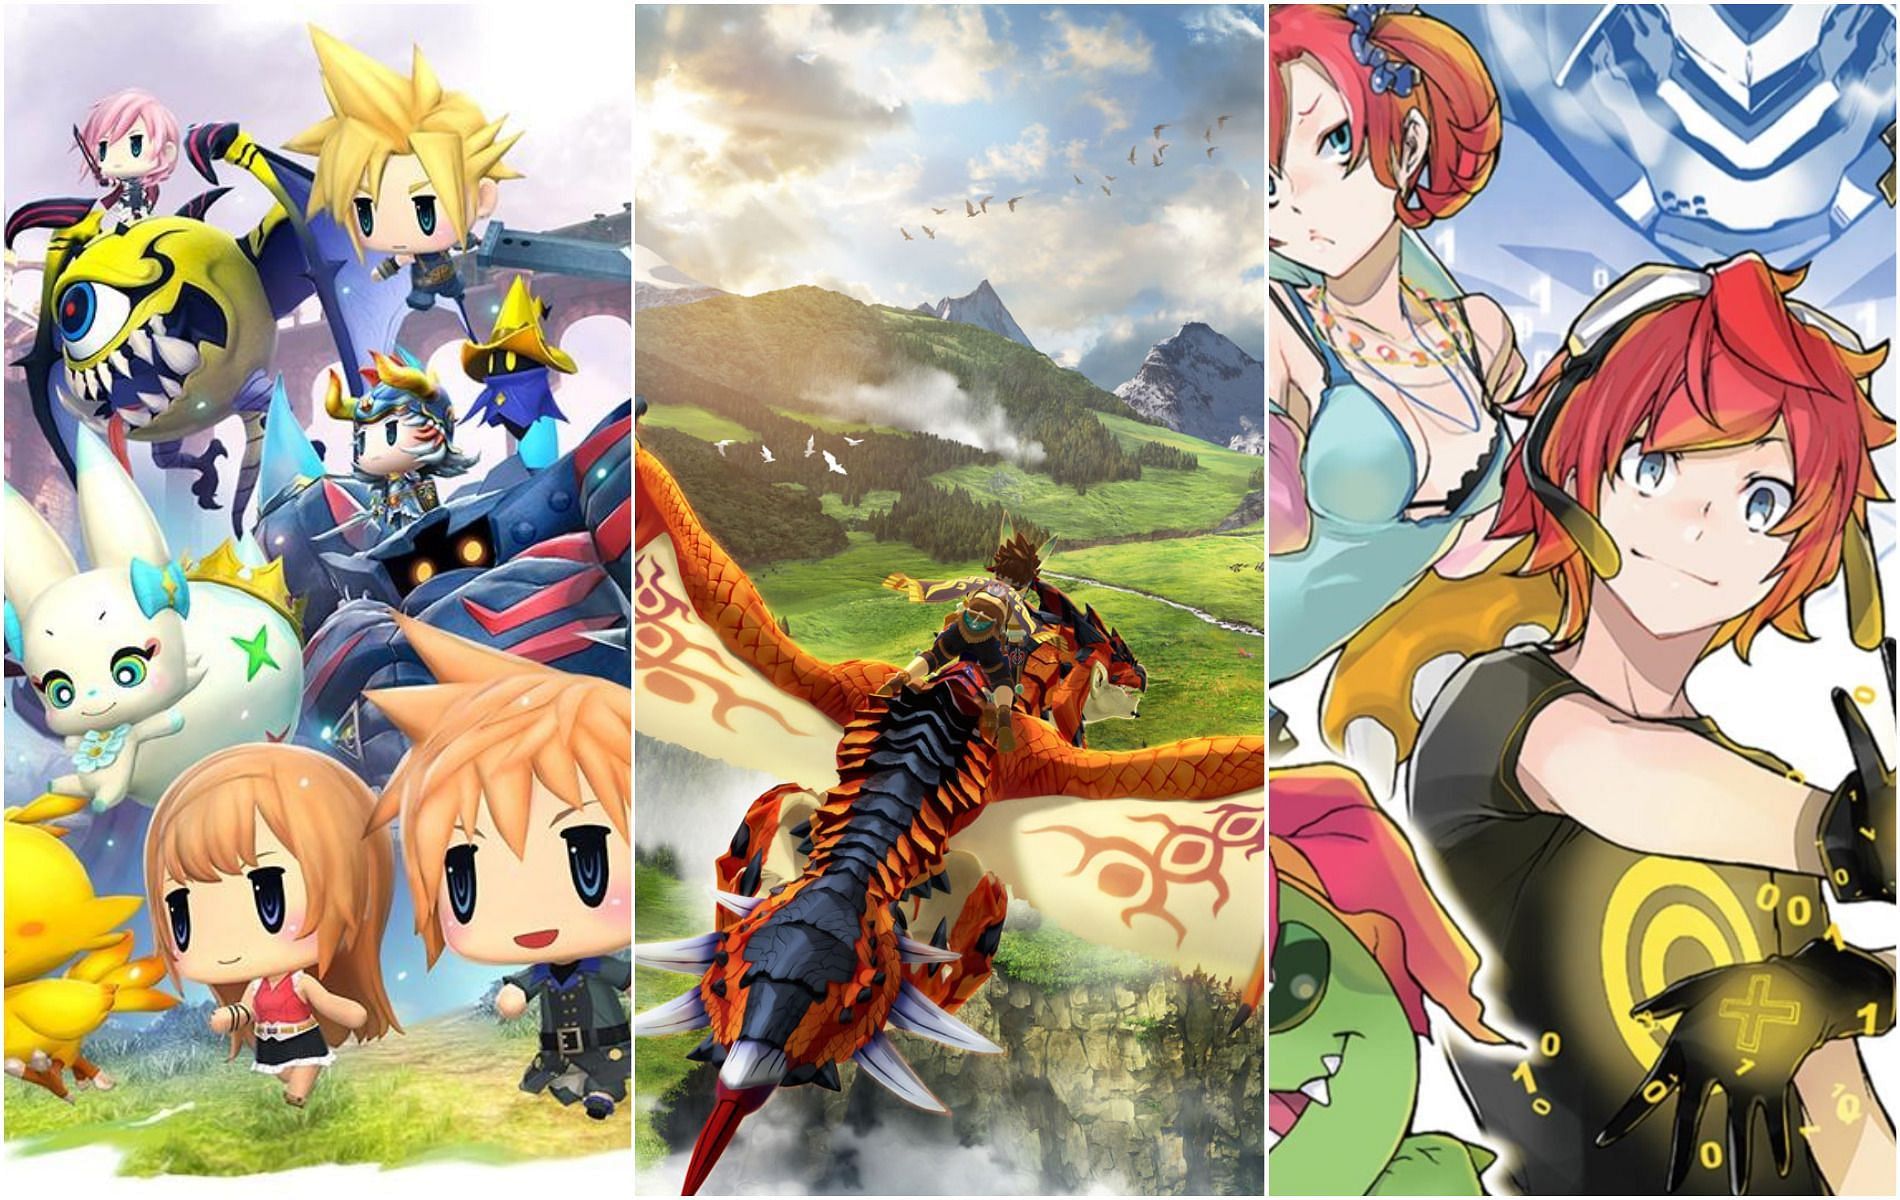 Collect adorable monsters and fearsome beasts in these popular monster-catching games (Images via Square Enix/Capcom/Bandai Namco)